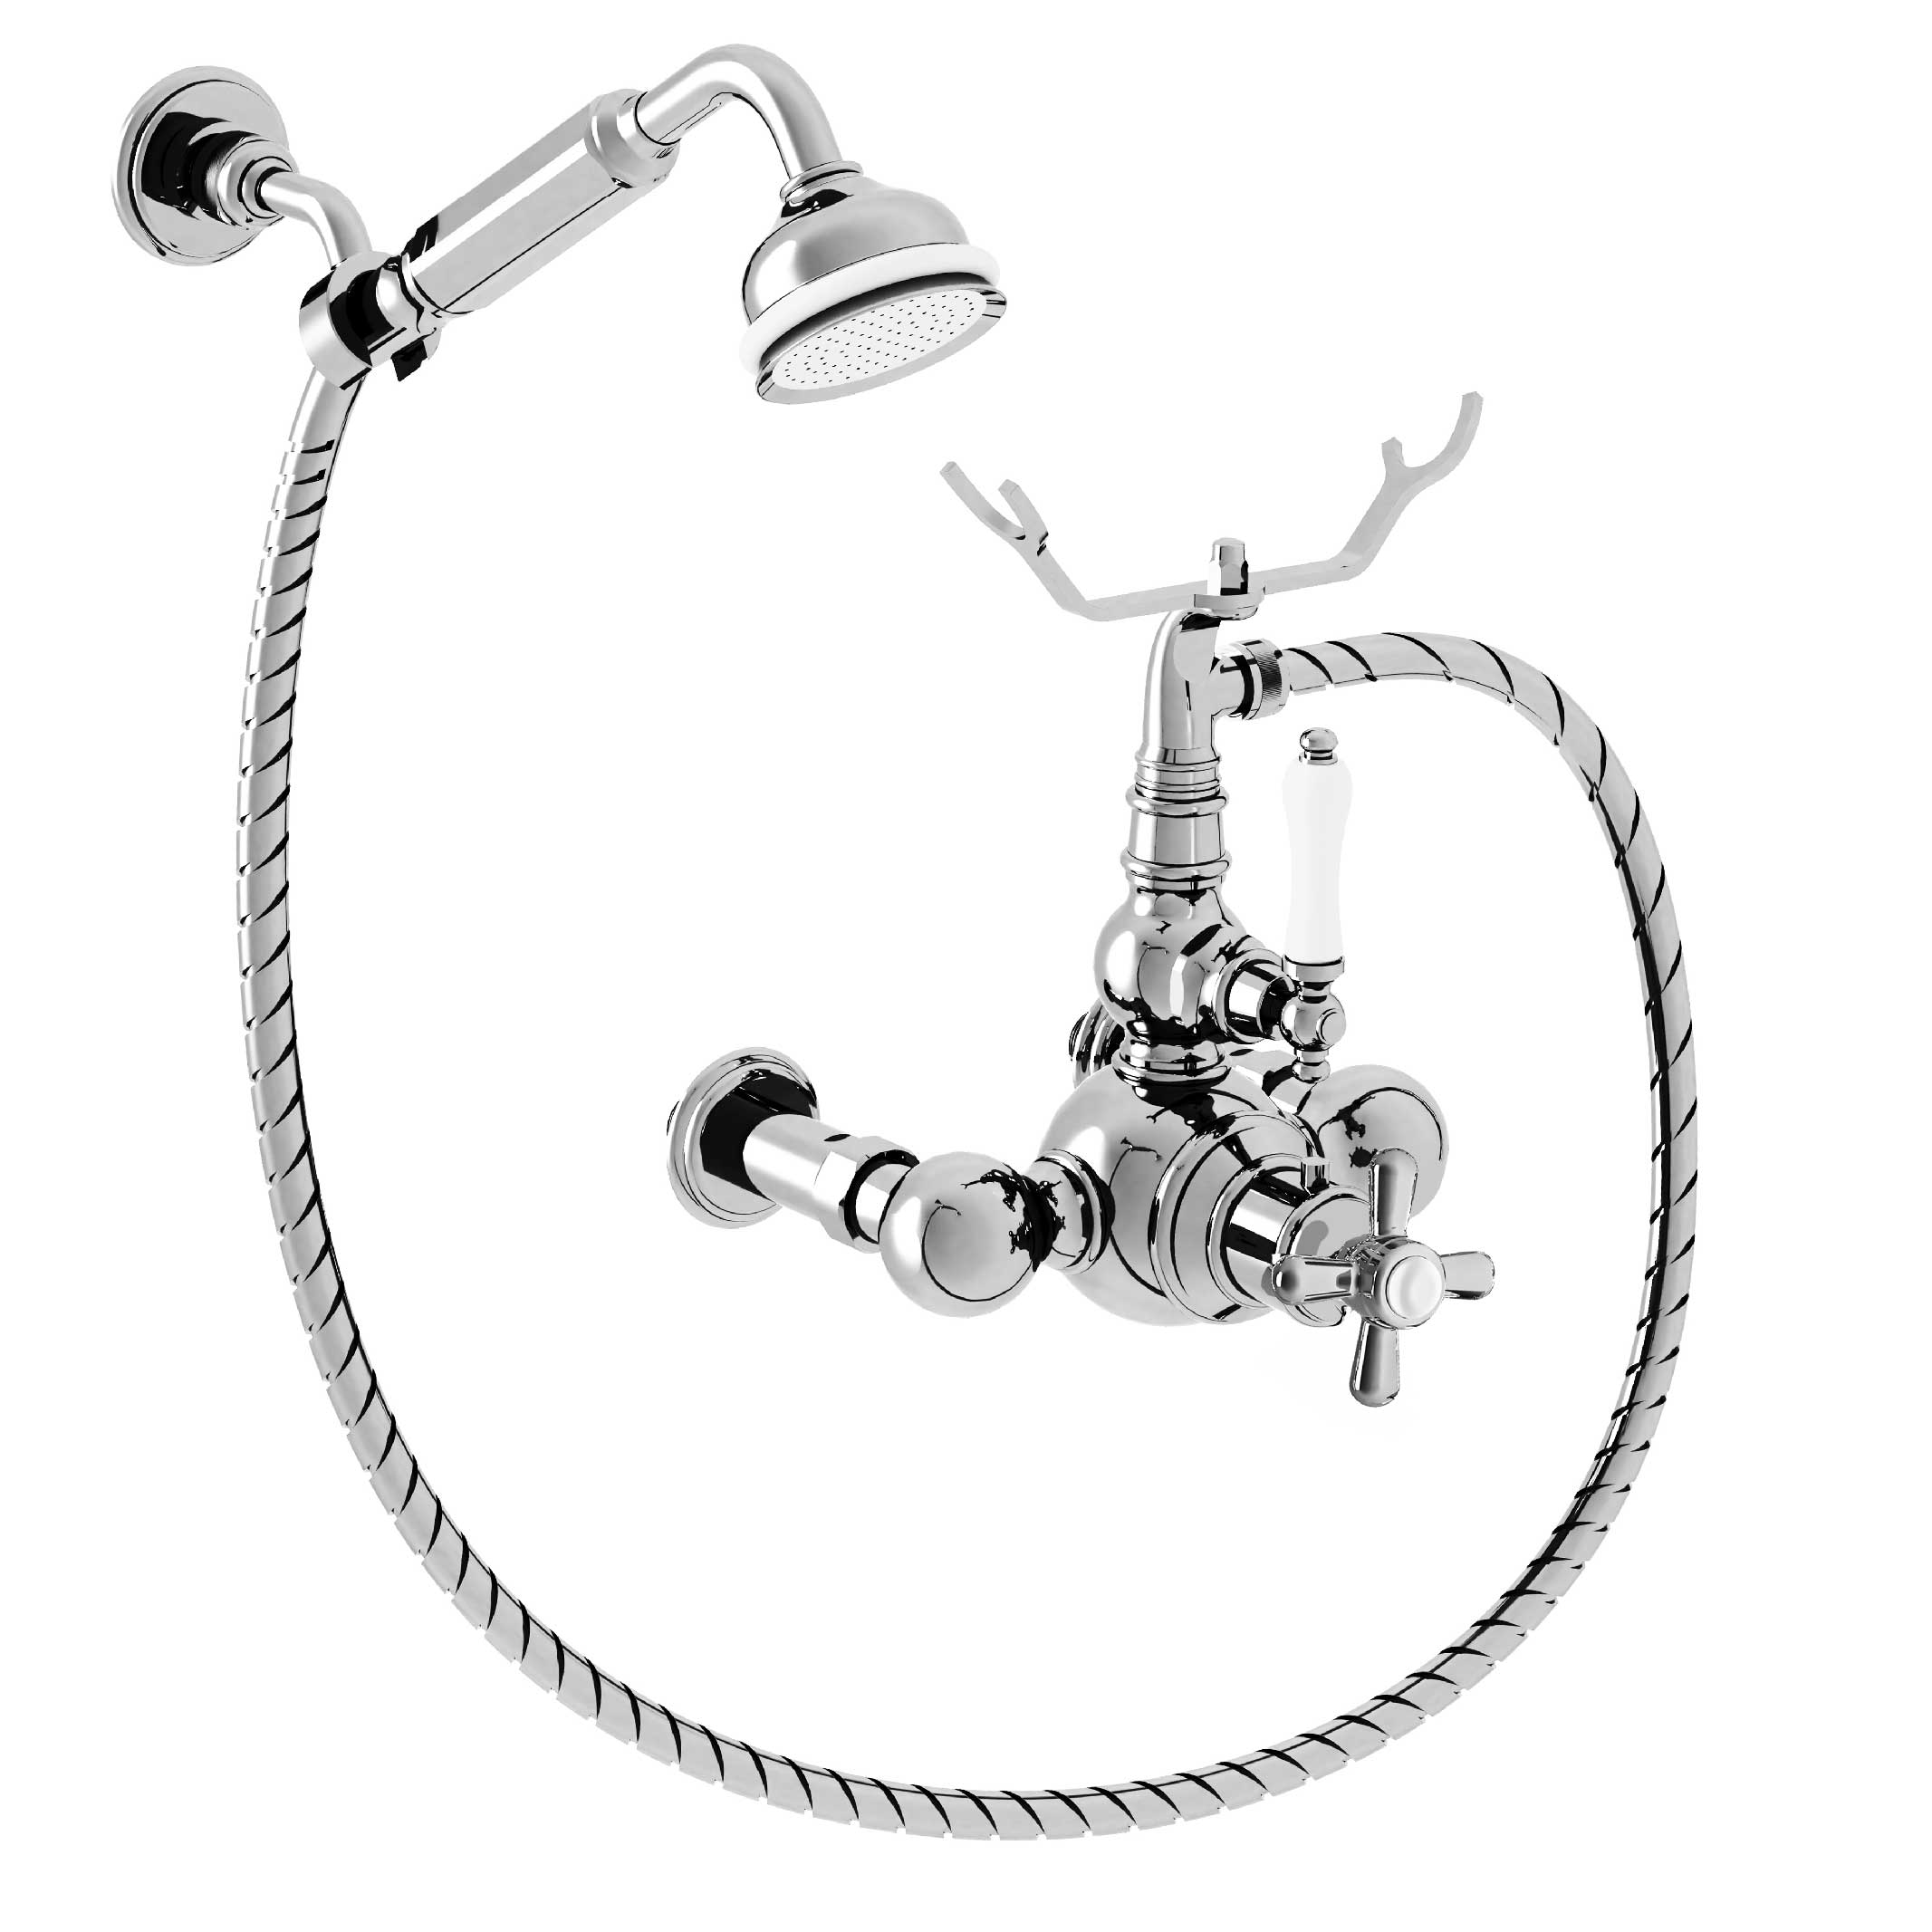 M40-2201T Thermostatic shower mixer with hook